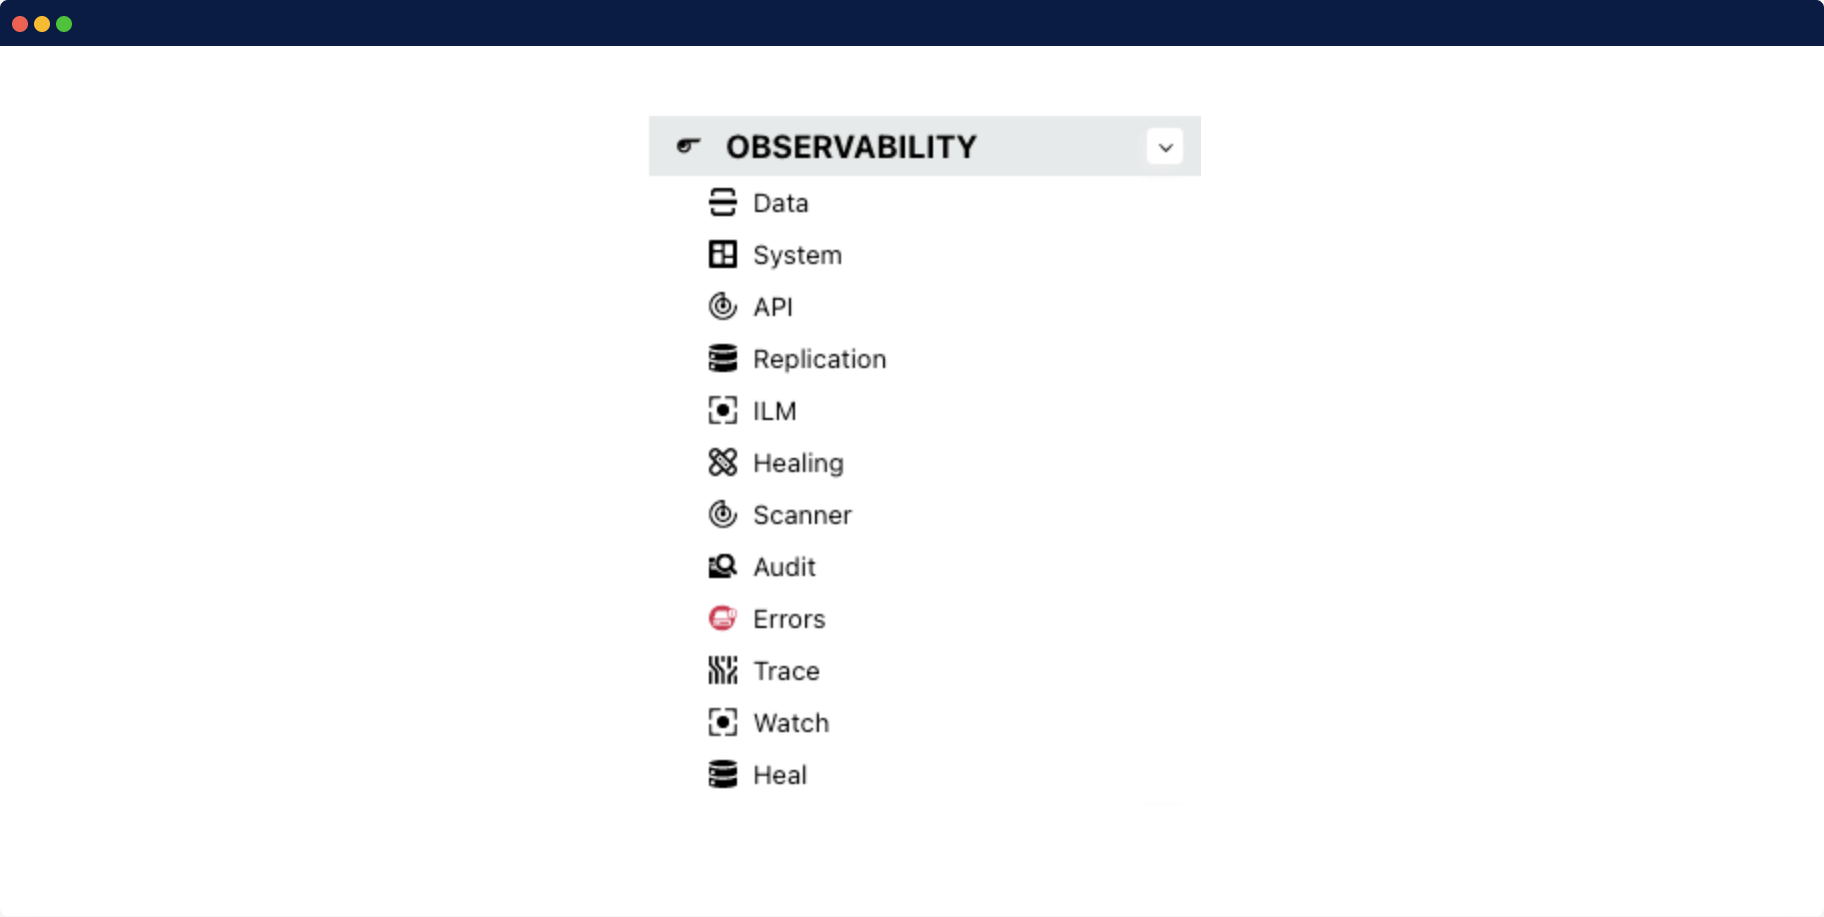 Observability